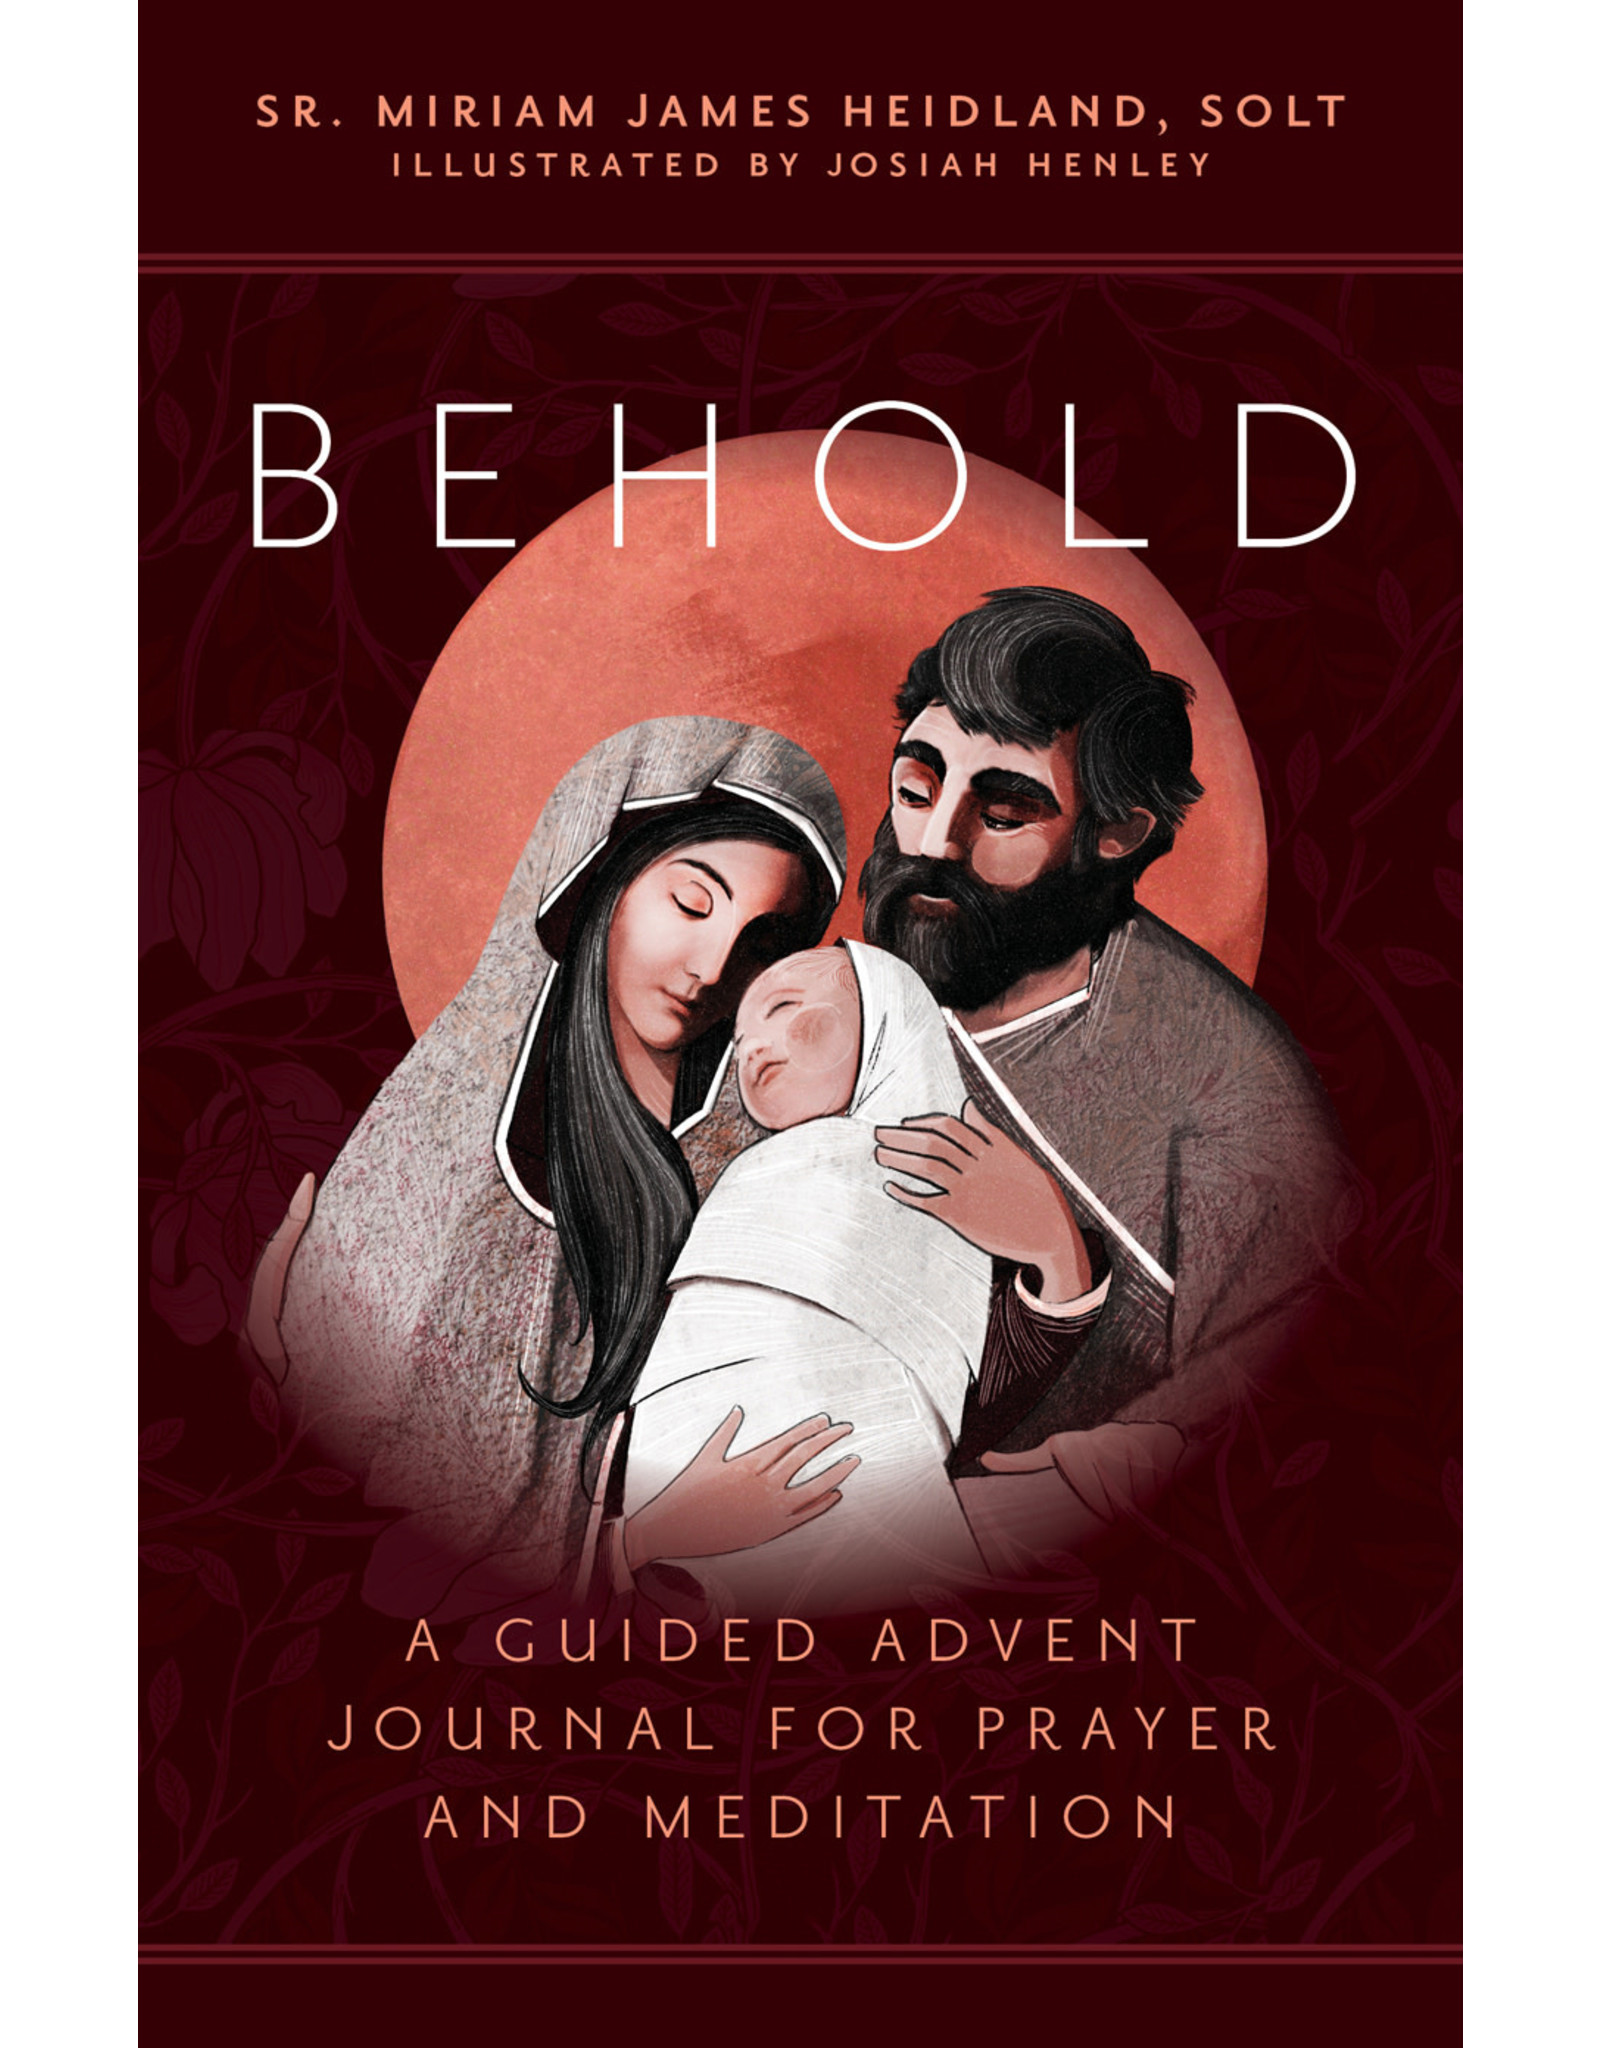 Behold: A Guided Advent Journal for Prayer & Meditation